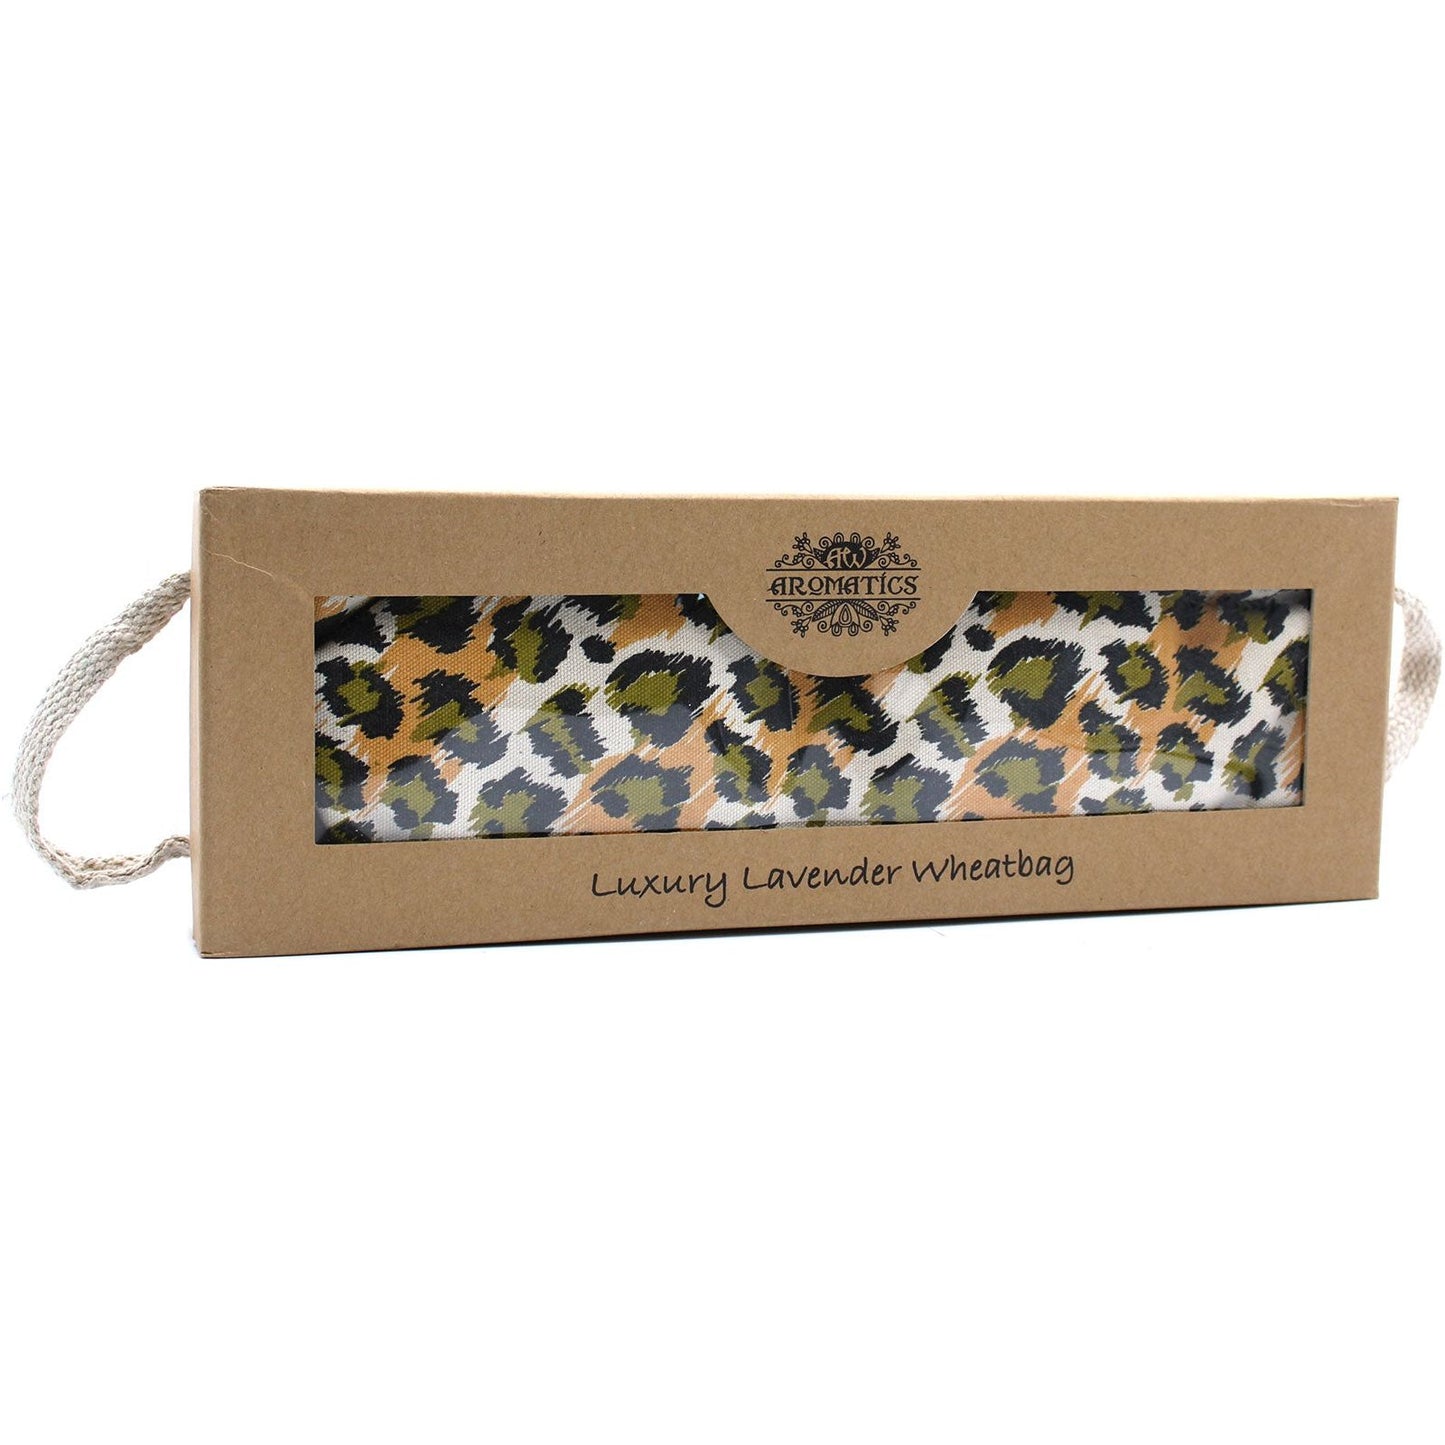 Luxury Lavender Wheat Bag in Gift Box - Night Leopard - Ashton and Finch